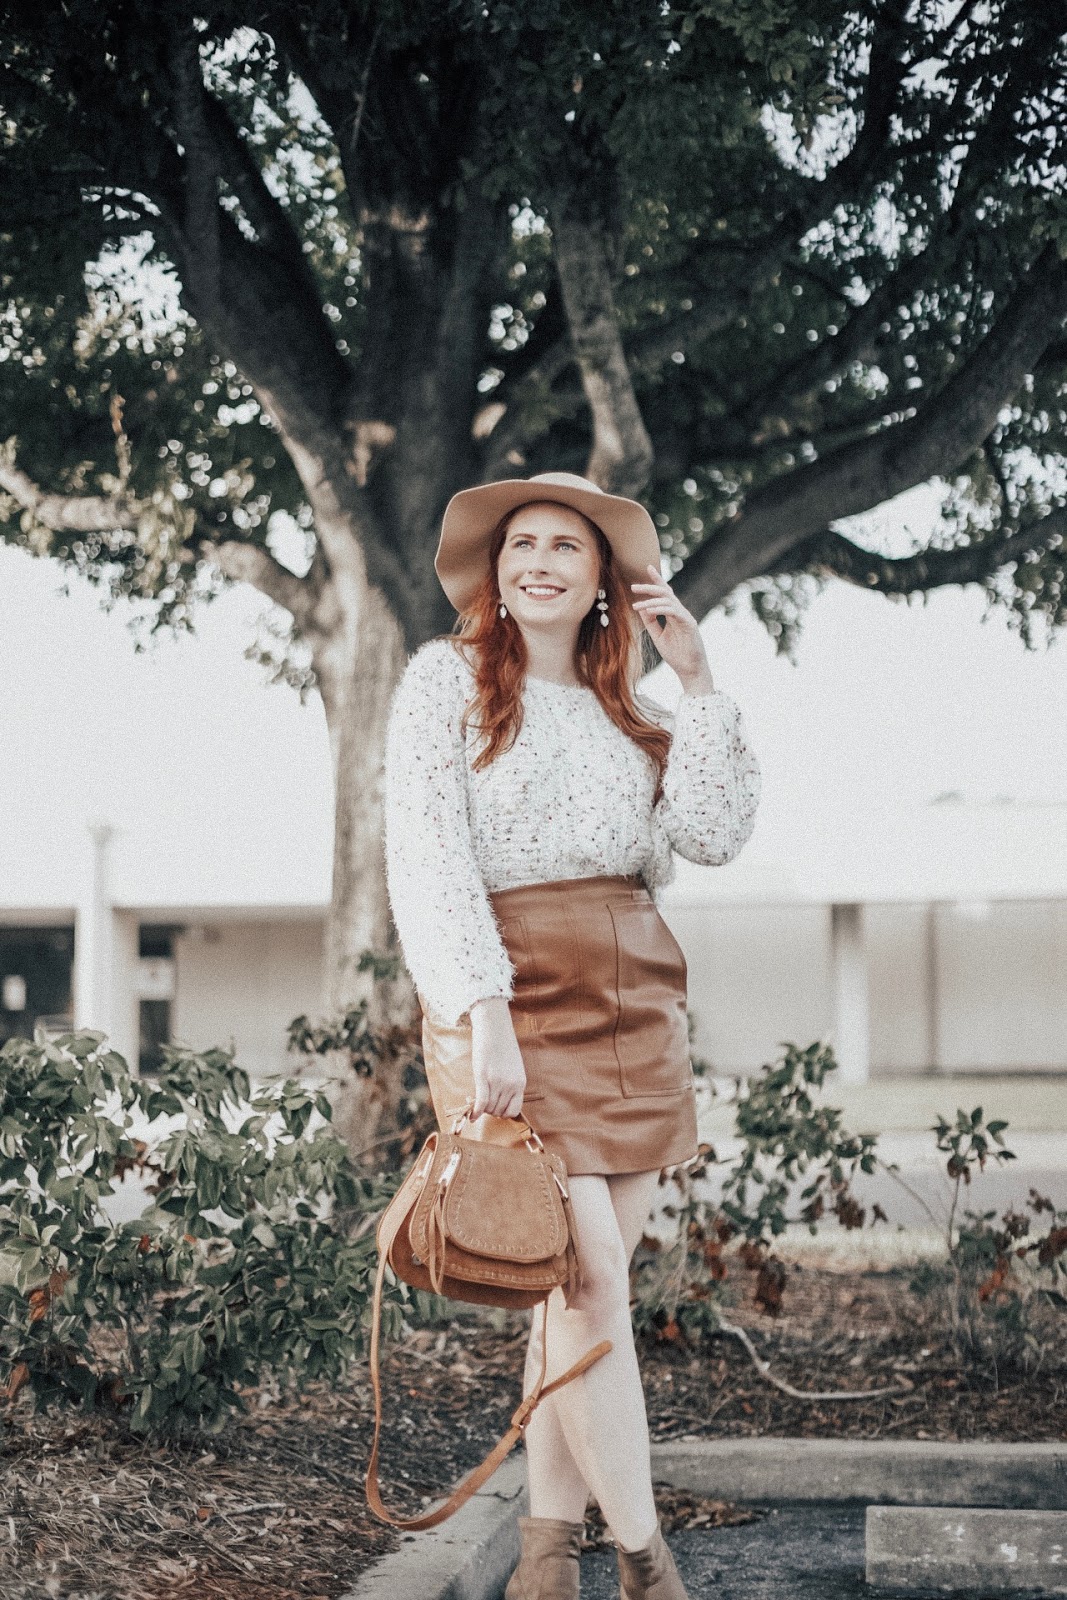 25+ Affordable Sweaters To Wear With Faux Leather Skirts | Affordable by Amanda, a Style Blog by Tampa Blogger Amanda Burrows | Fall Outfit Inspiration from Pinterest 2019